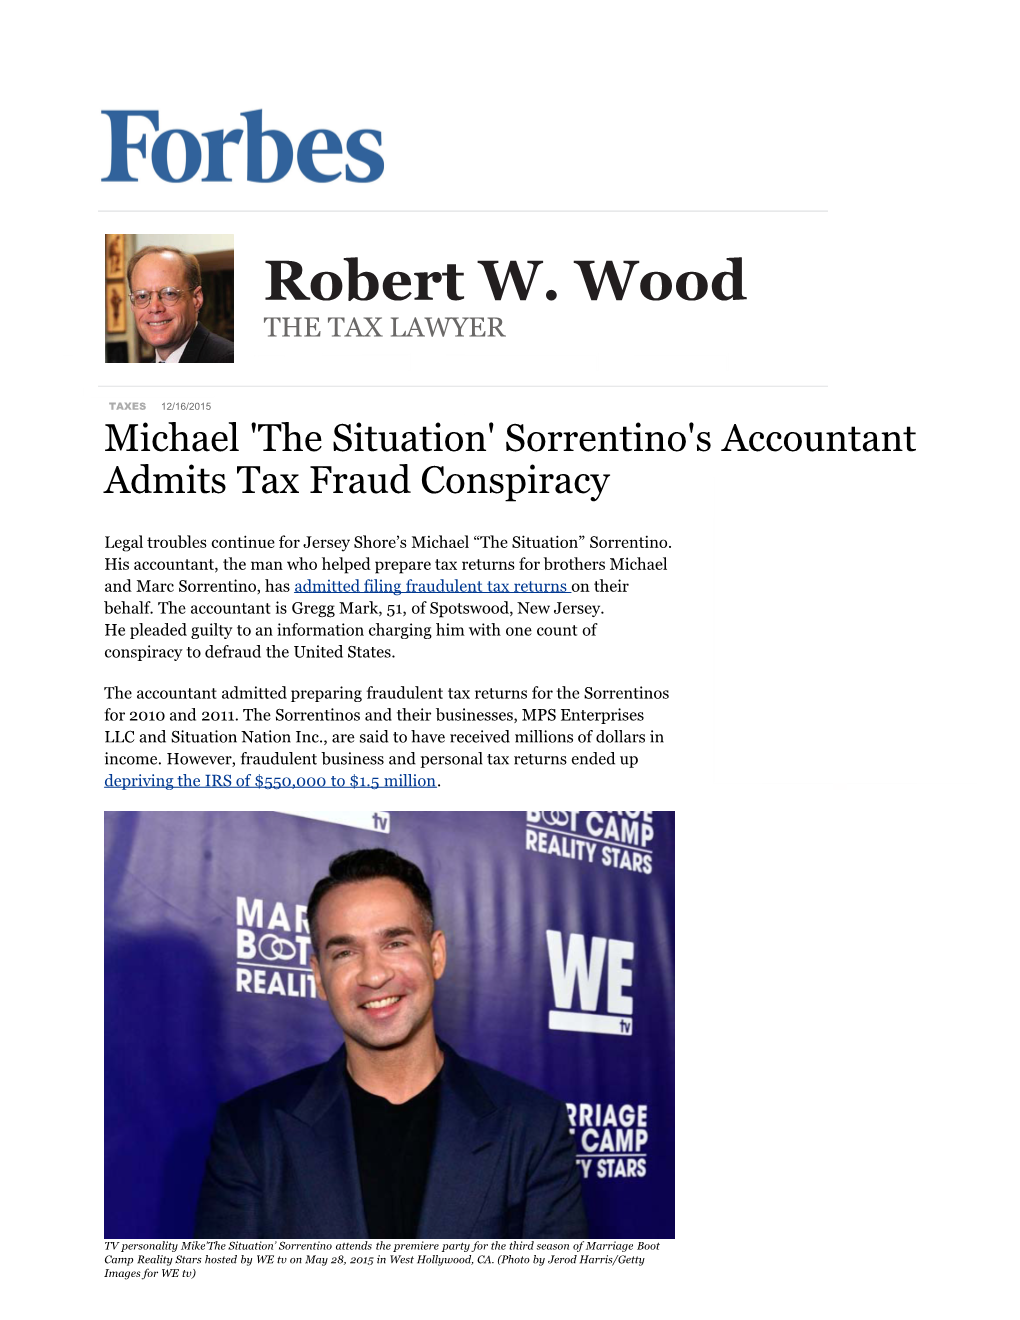 Michael 'The Situation' Sorrentino's Accountant Admits Tax Fraud Conspiracy